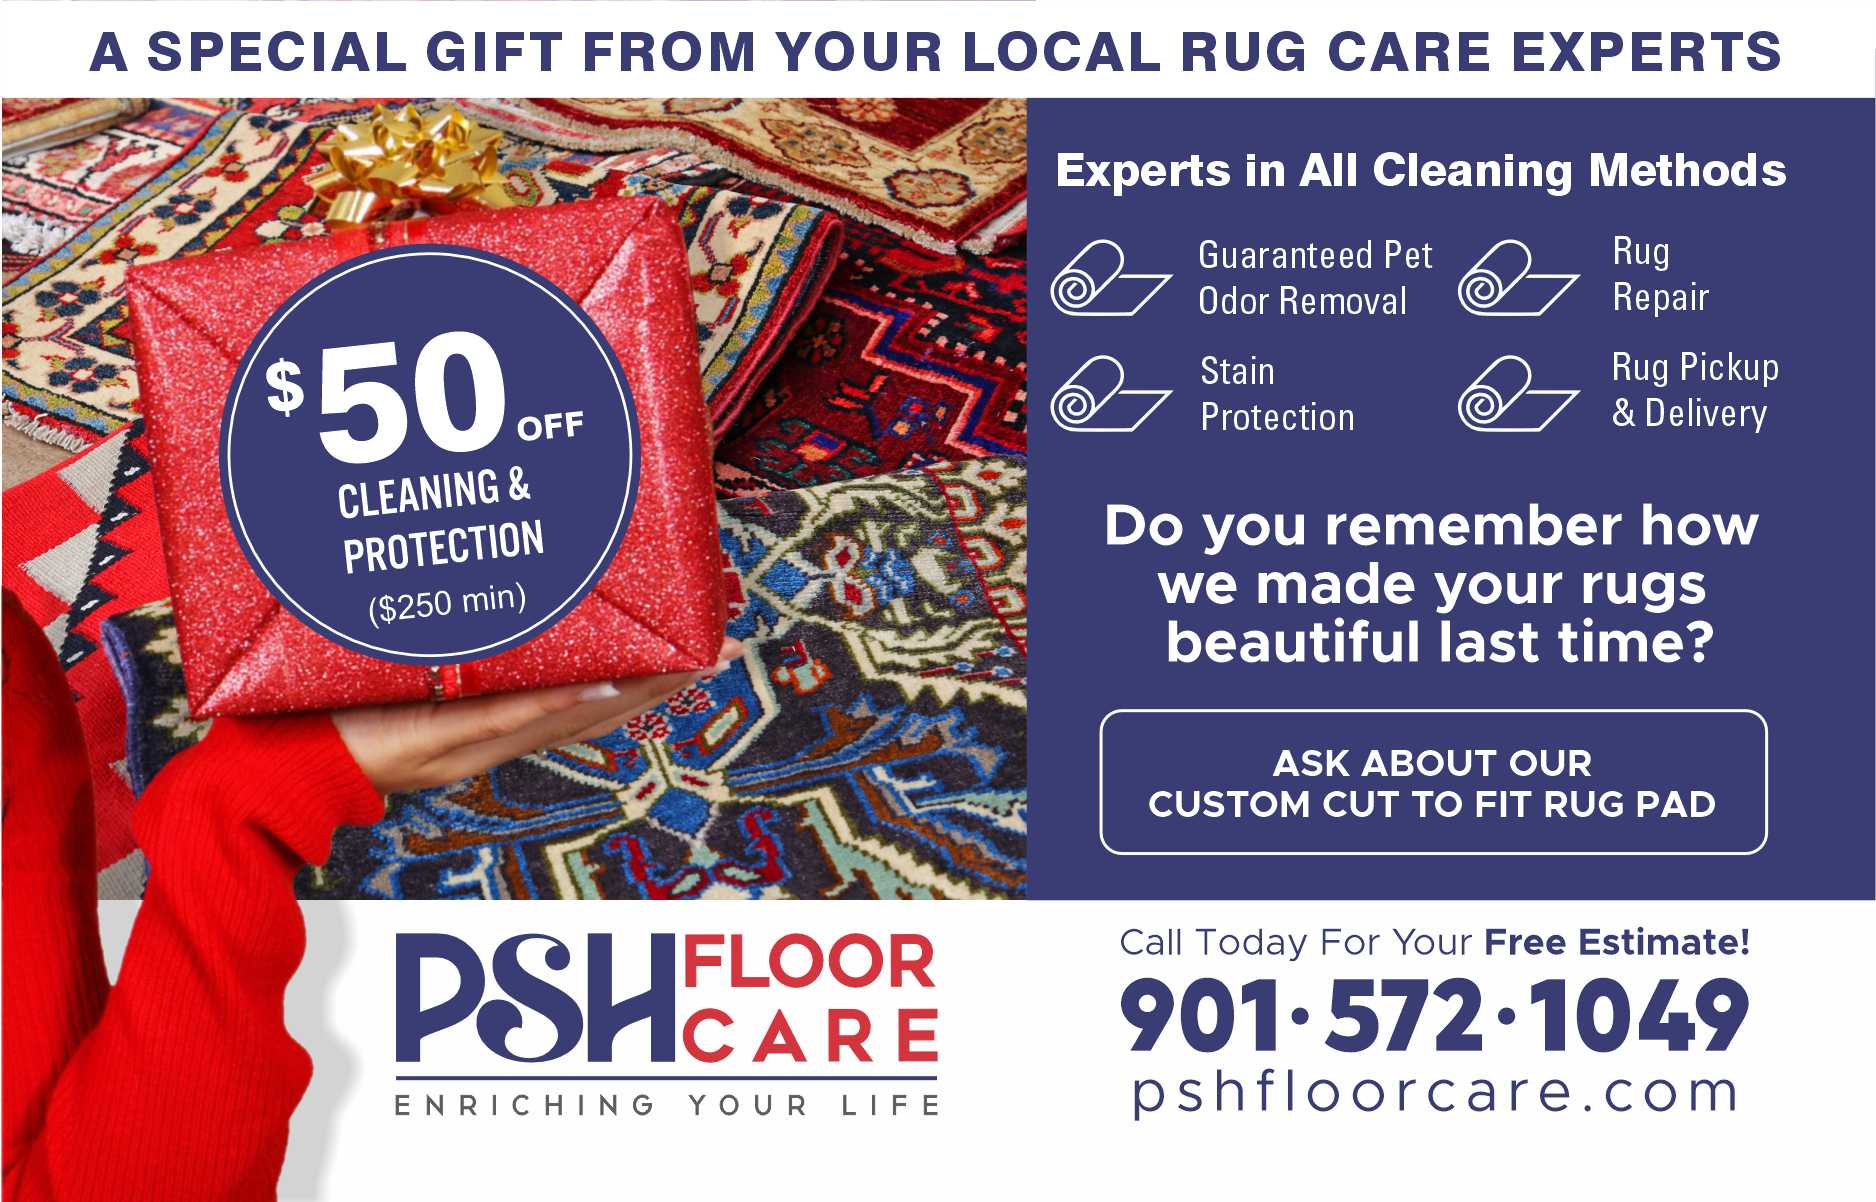 April Specials for PSH Floorcare - Rug Cleaning and Protection